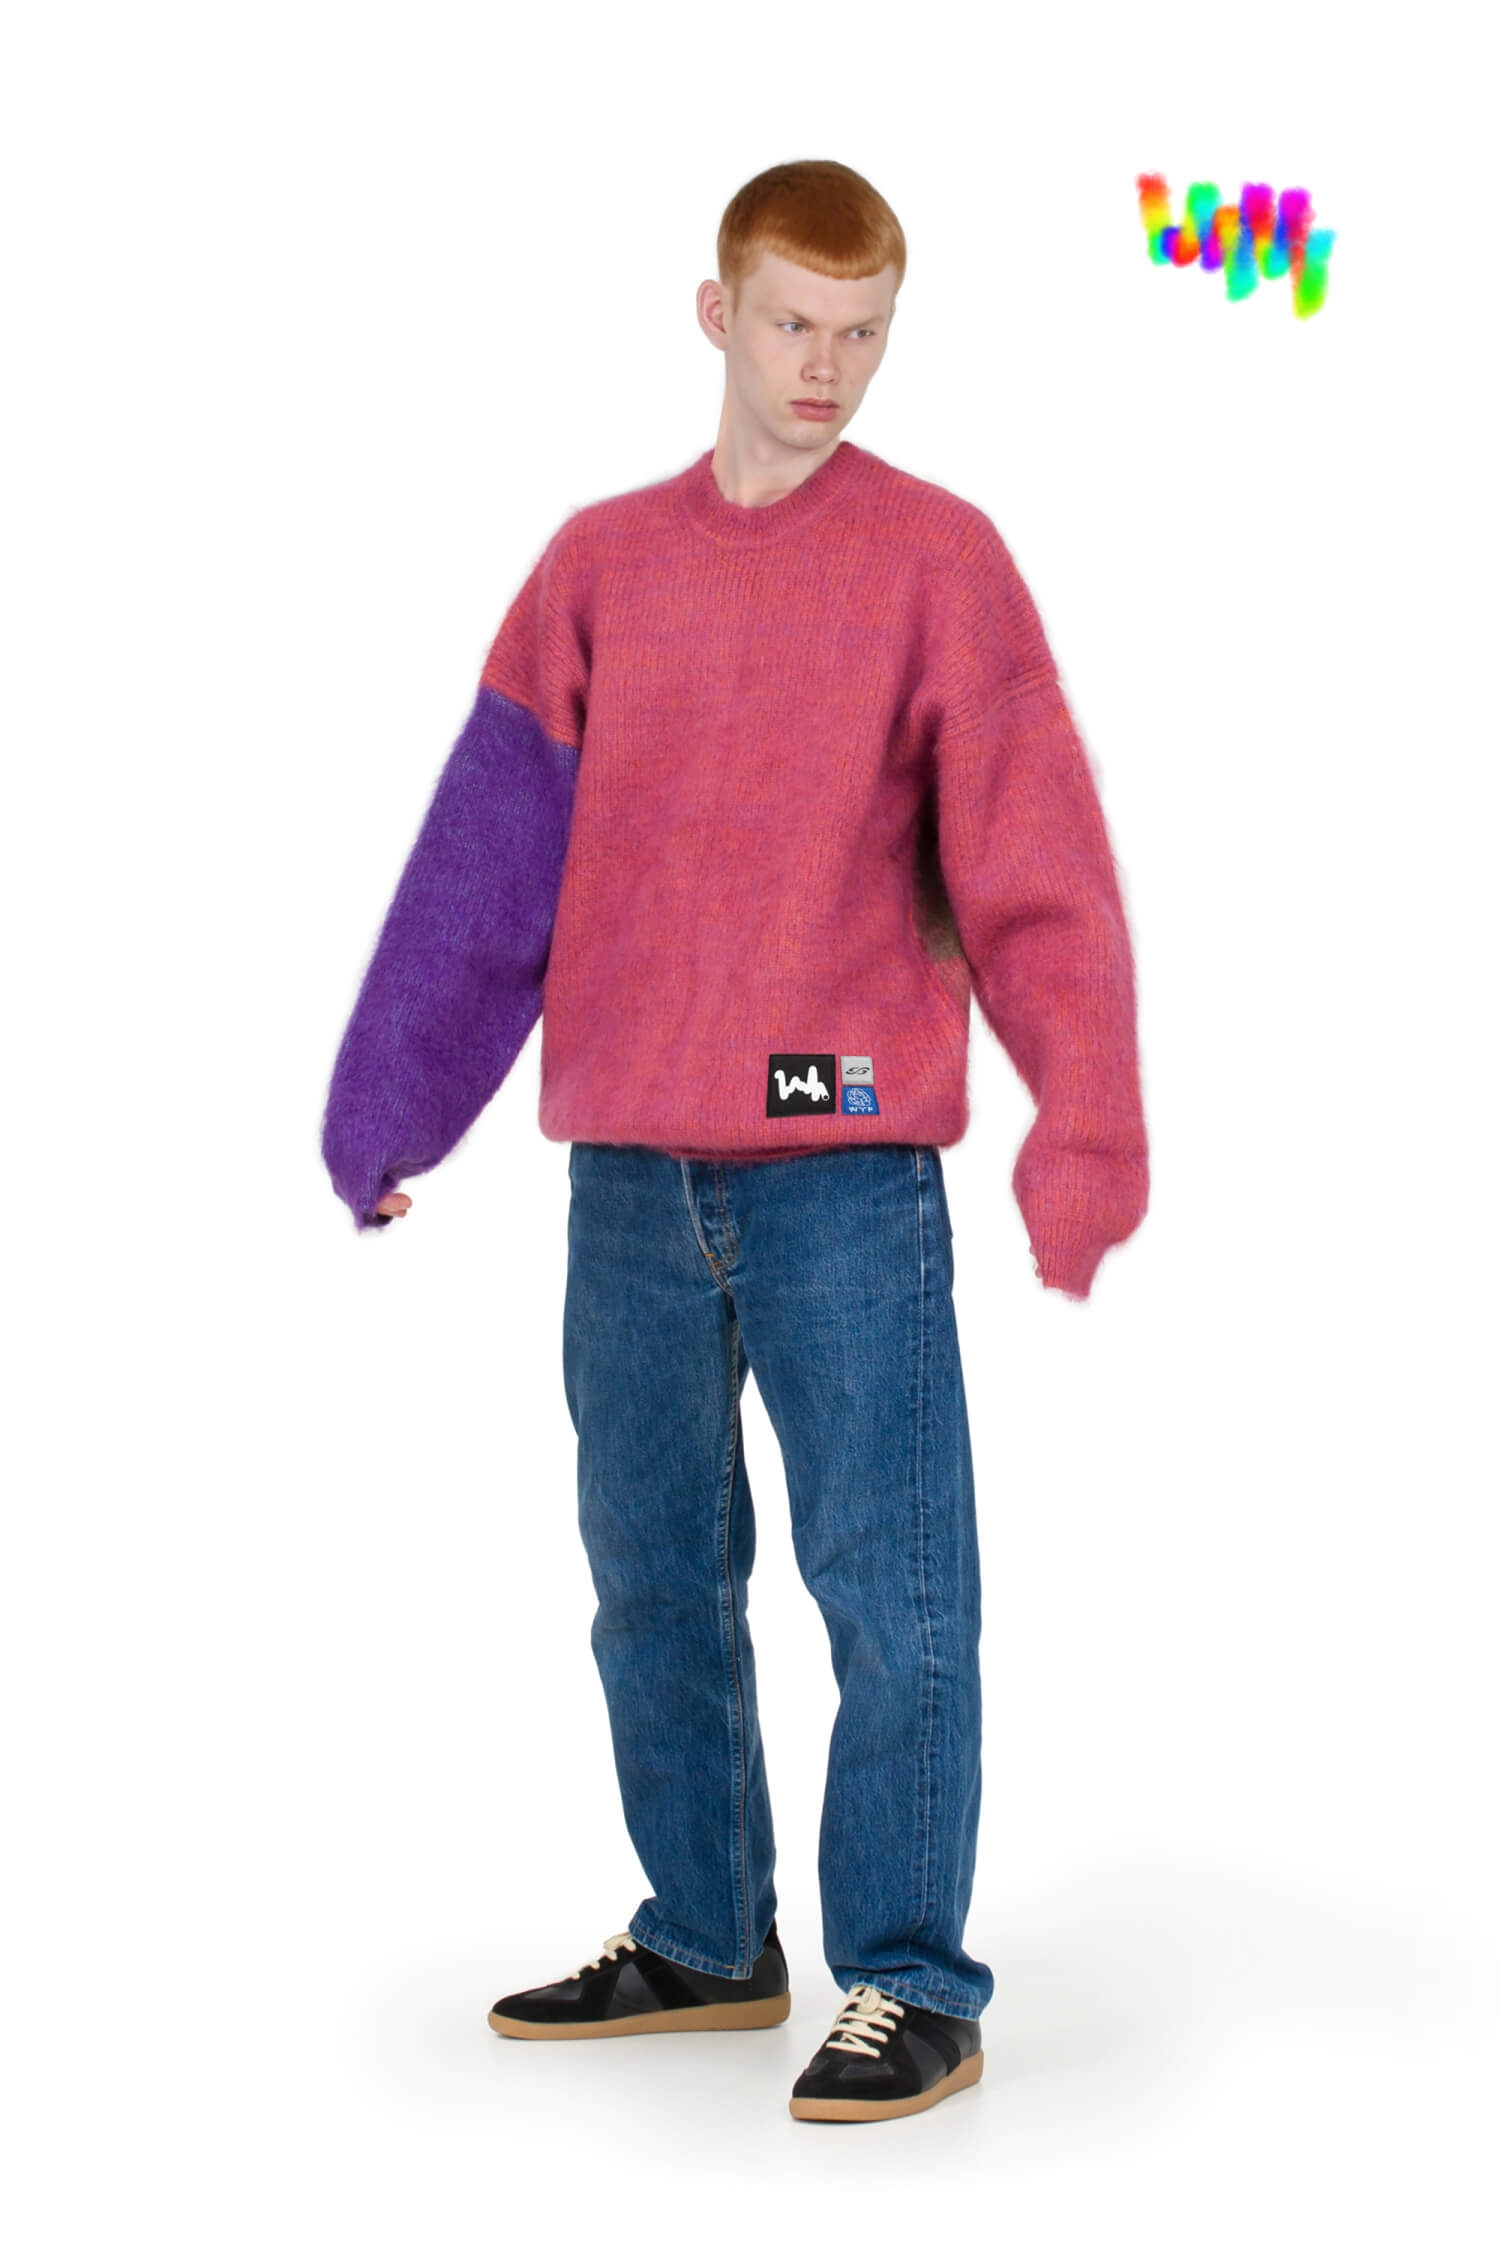 ODDS generative sweater based on Squiggle #3437 Fuzzy on a male model